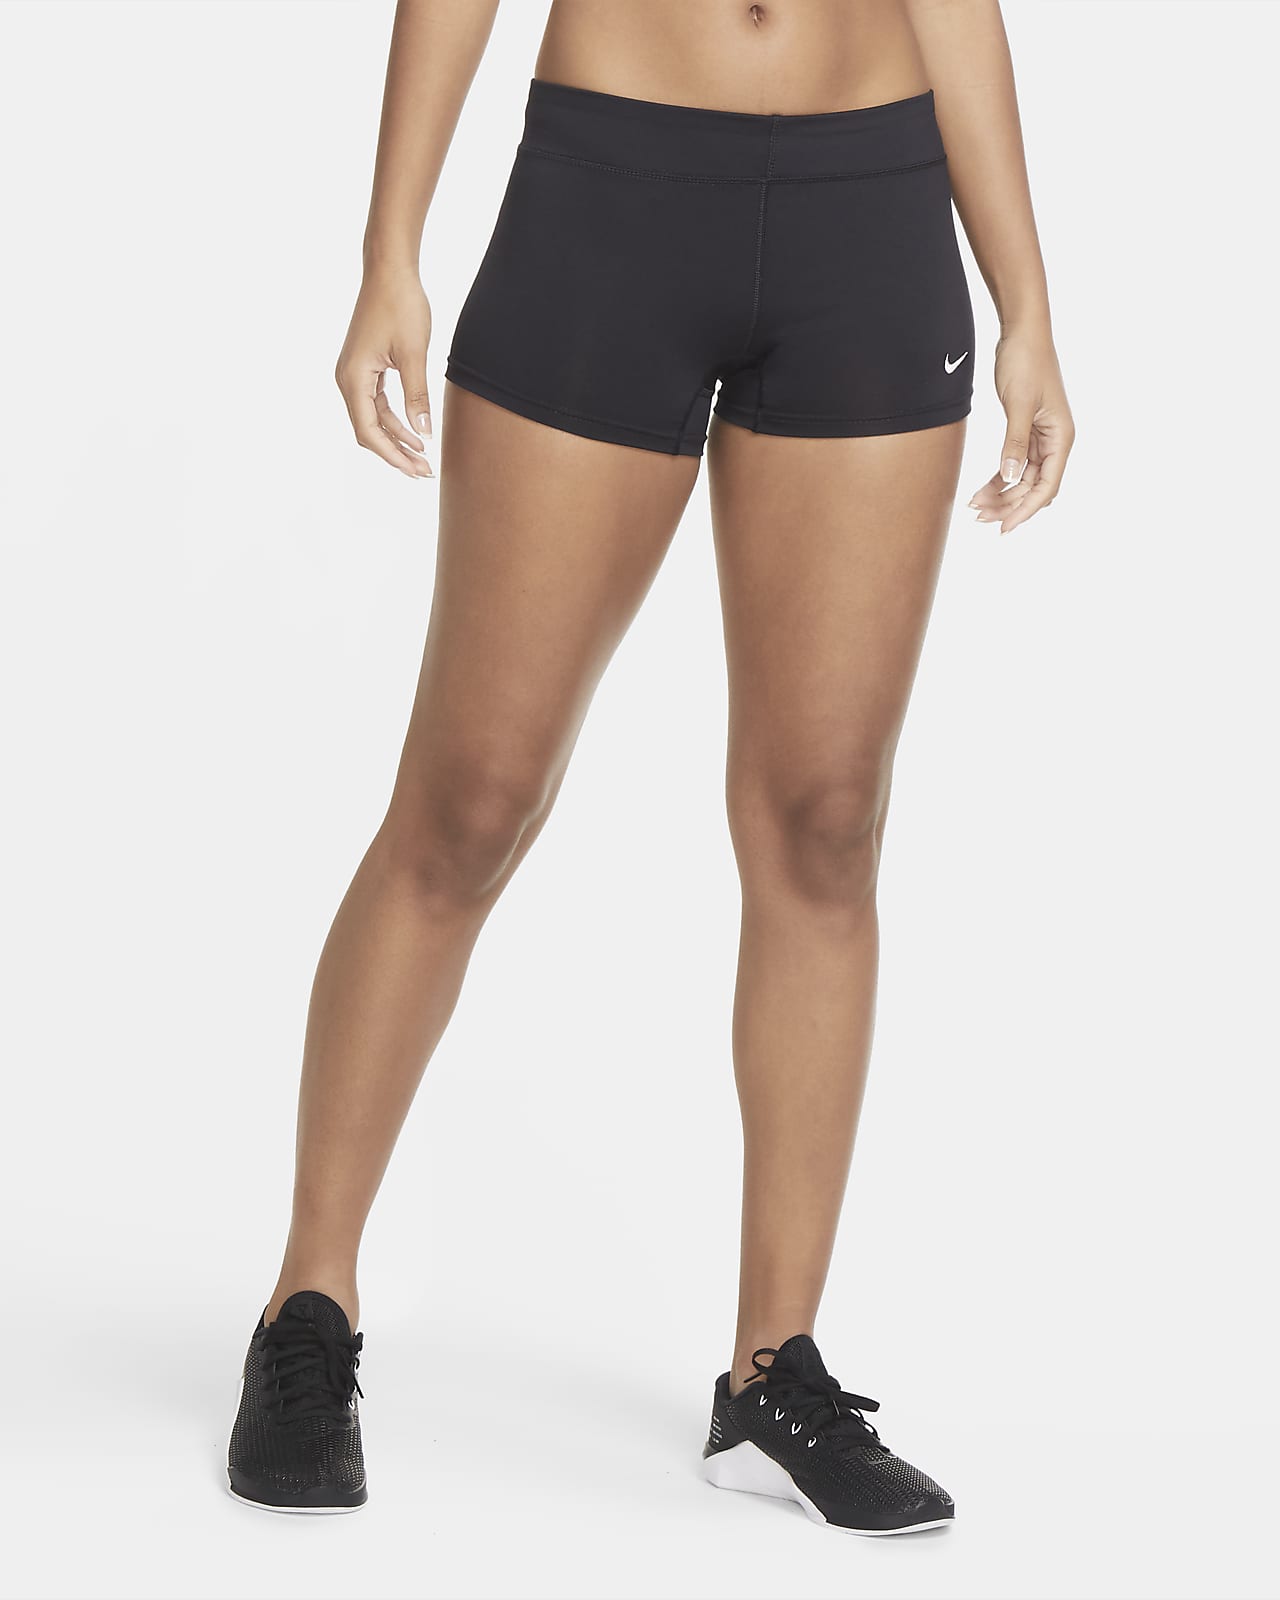 madre mal humor evolución Nike Performance Women's Game Volleyball Shorts. Nike.com